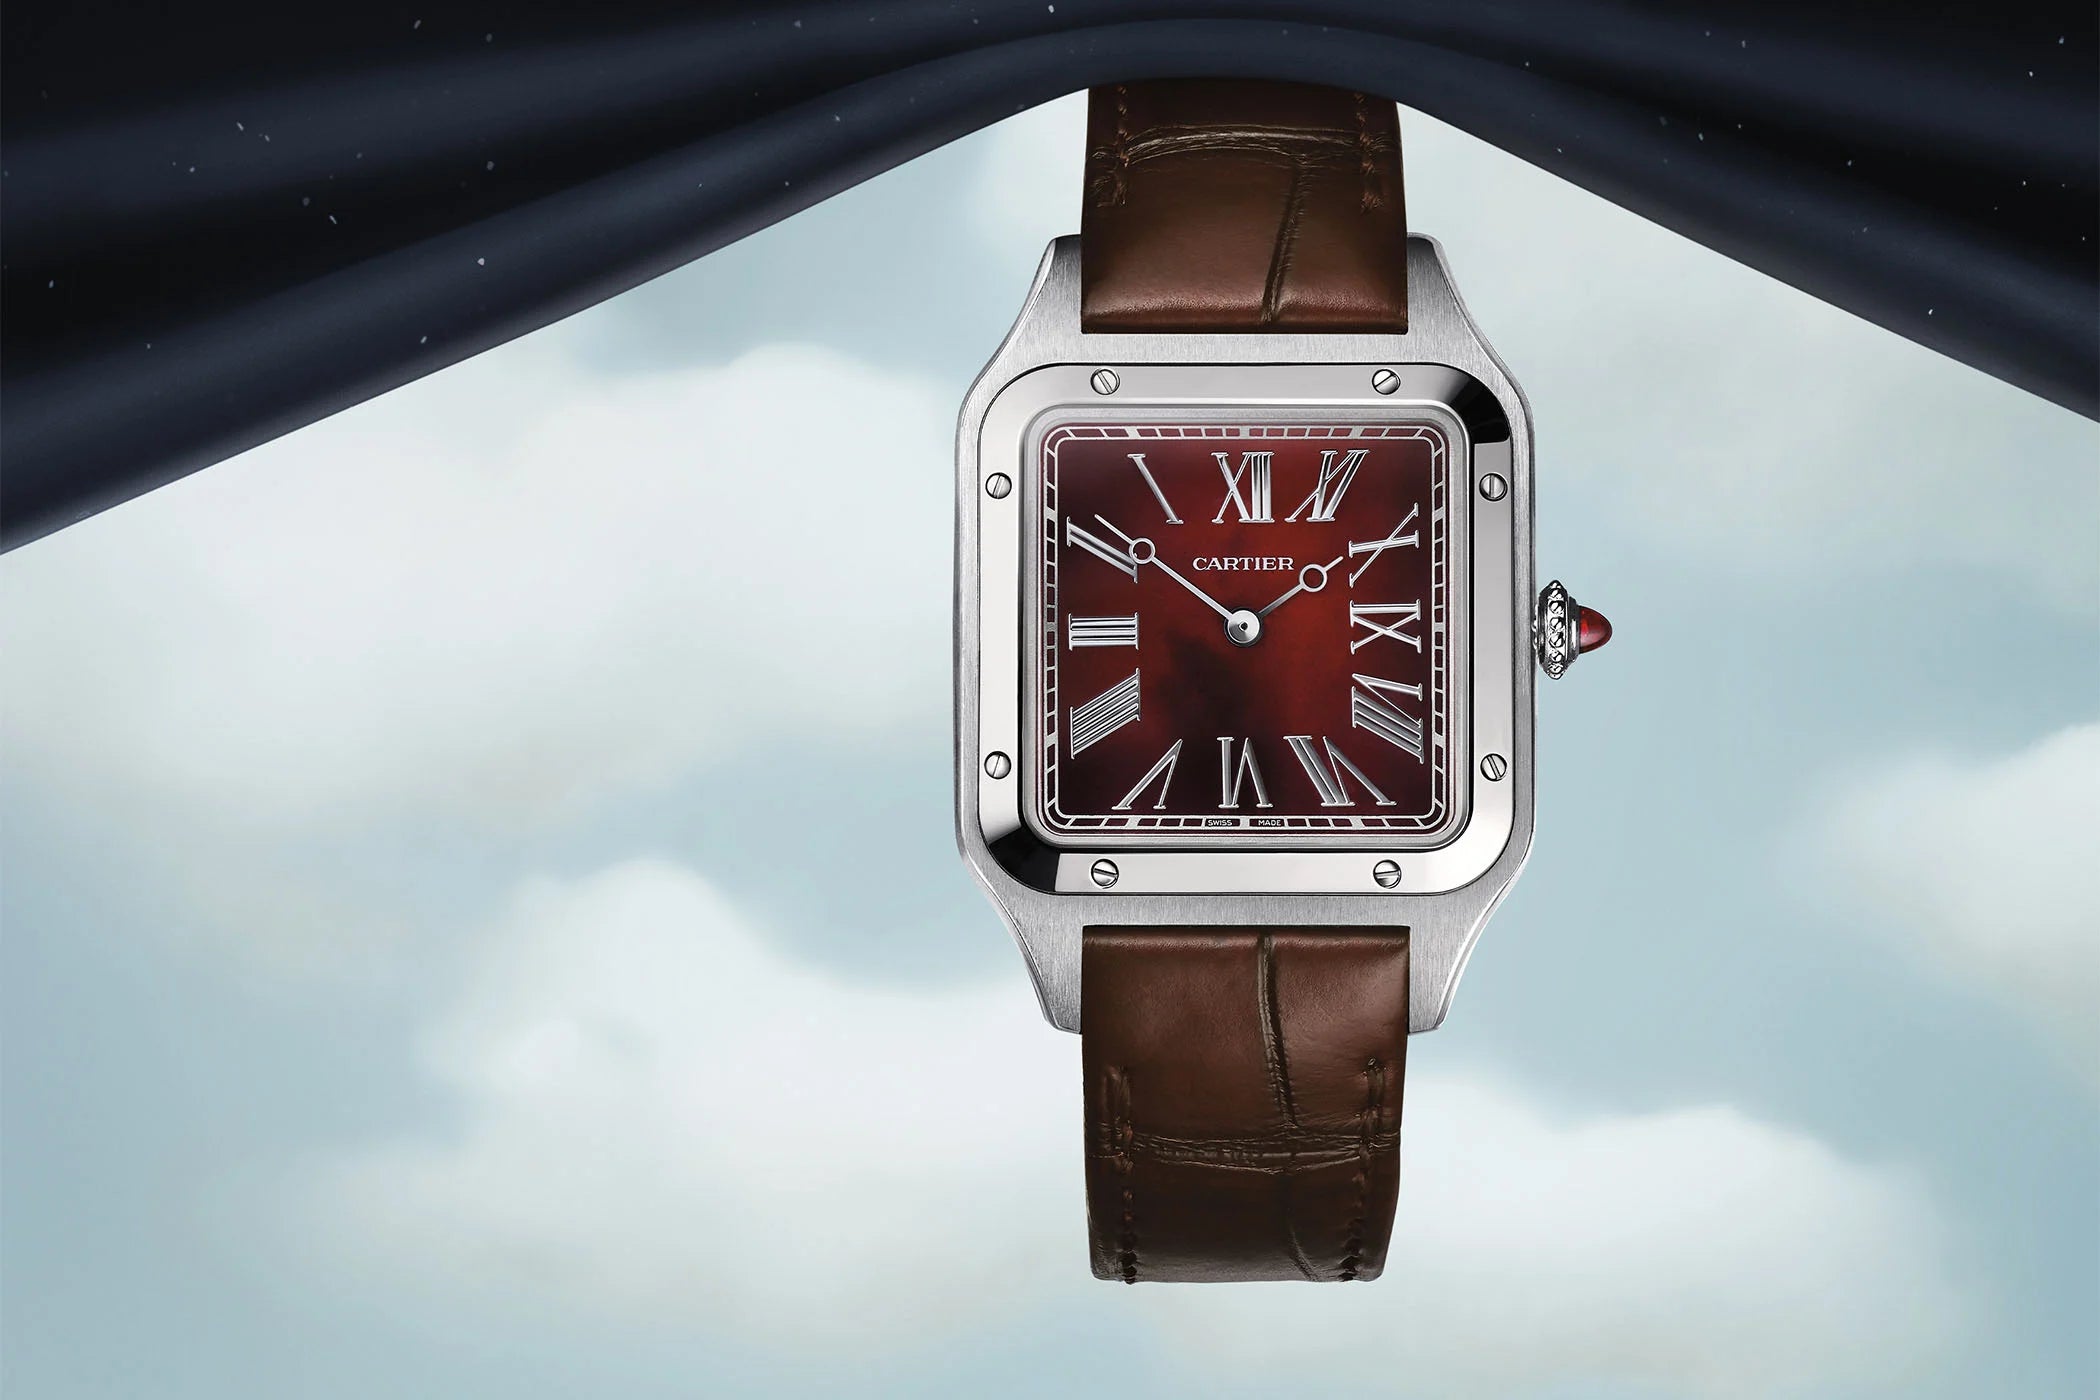 Cartier Wins Watches & Wonders Blending High Horology and High Fashion ...